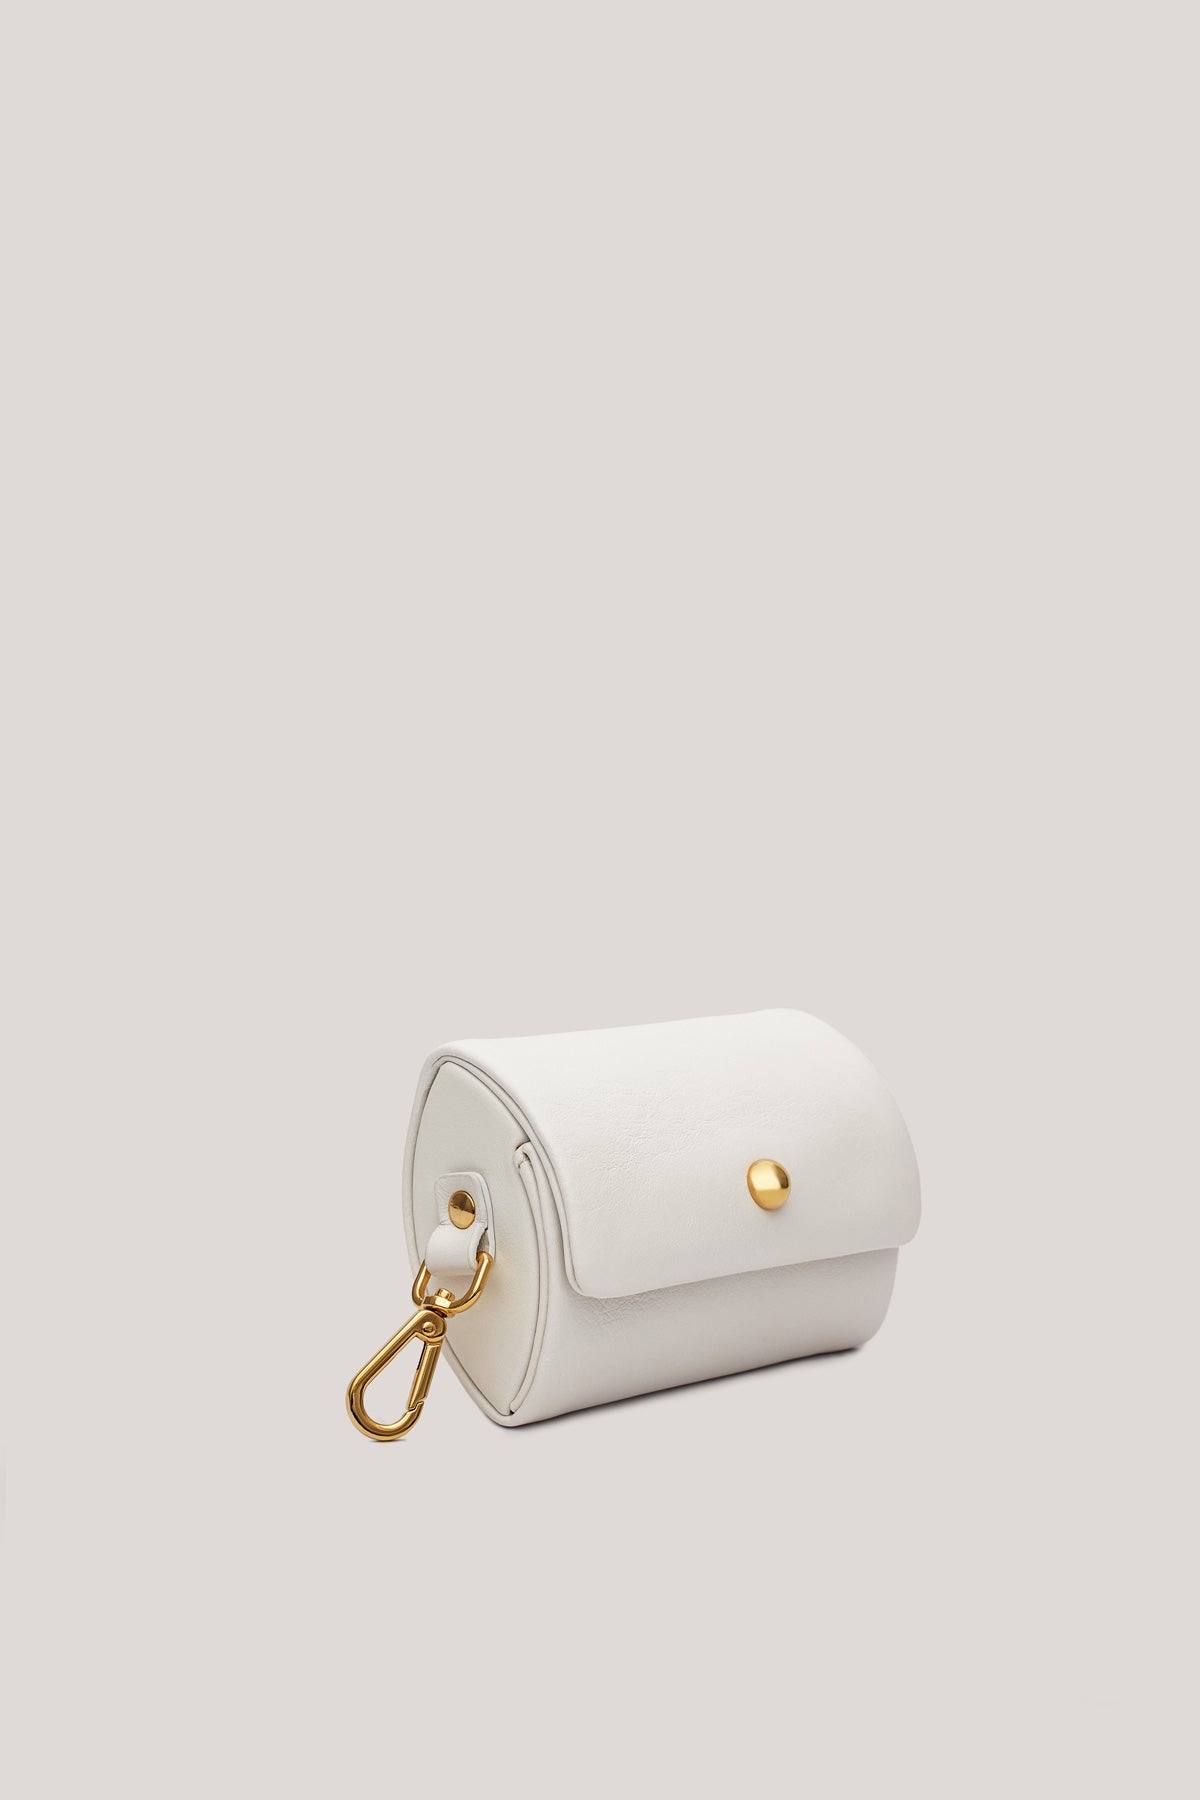 Didi bianco is a white elegant coin bag made of quality leather